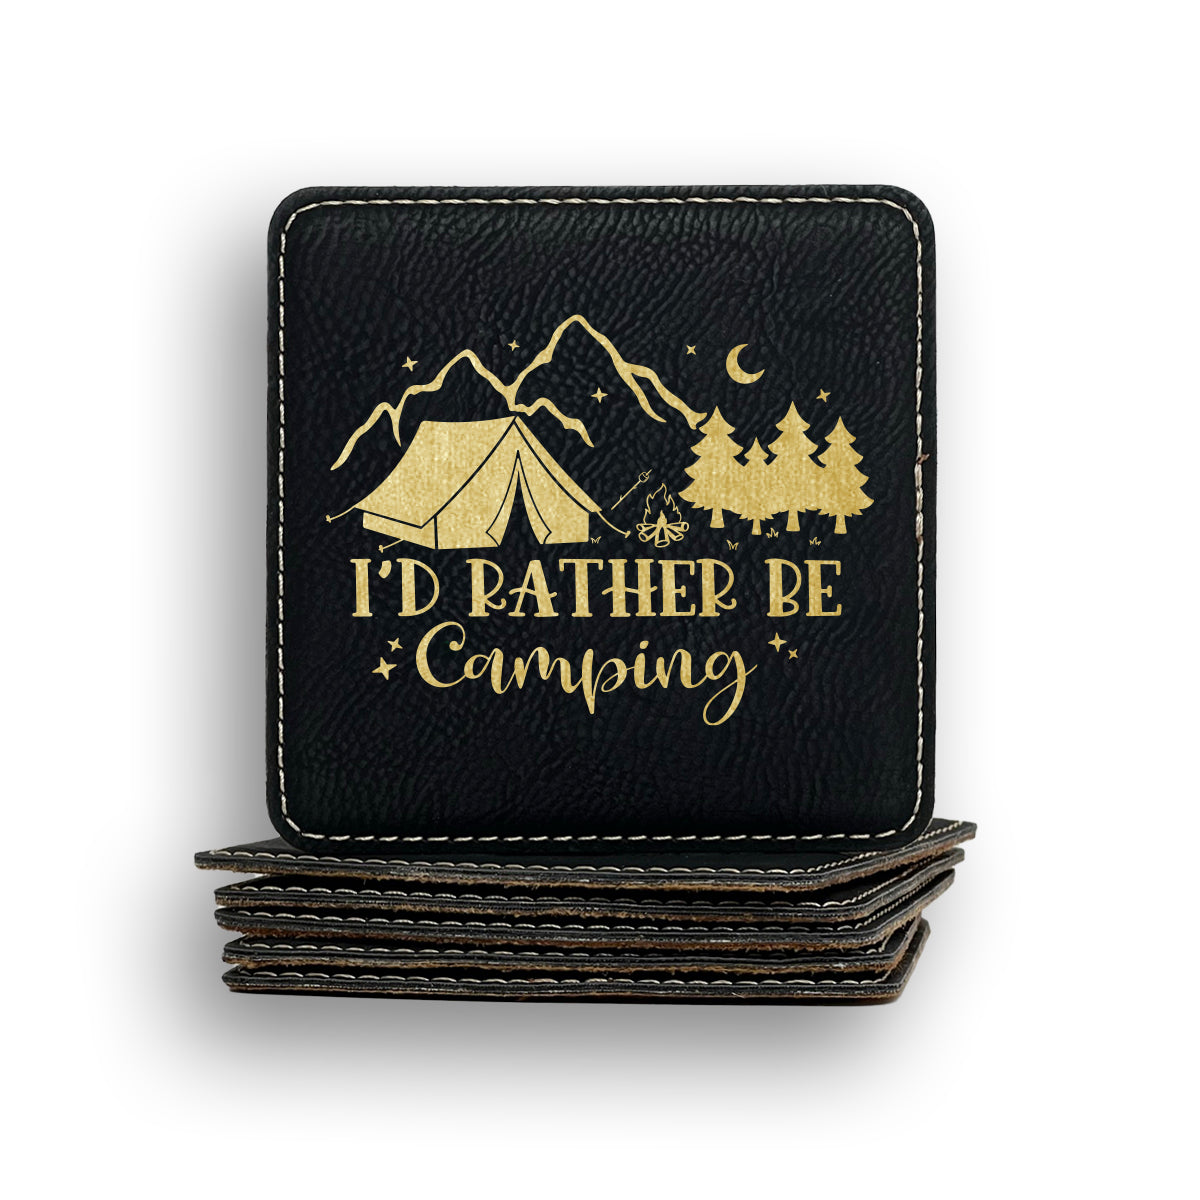 I'd Rather Be Camping Coaster